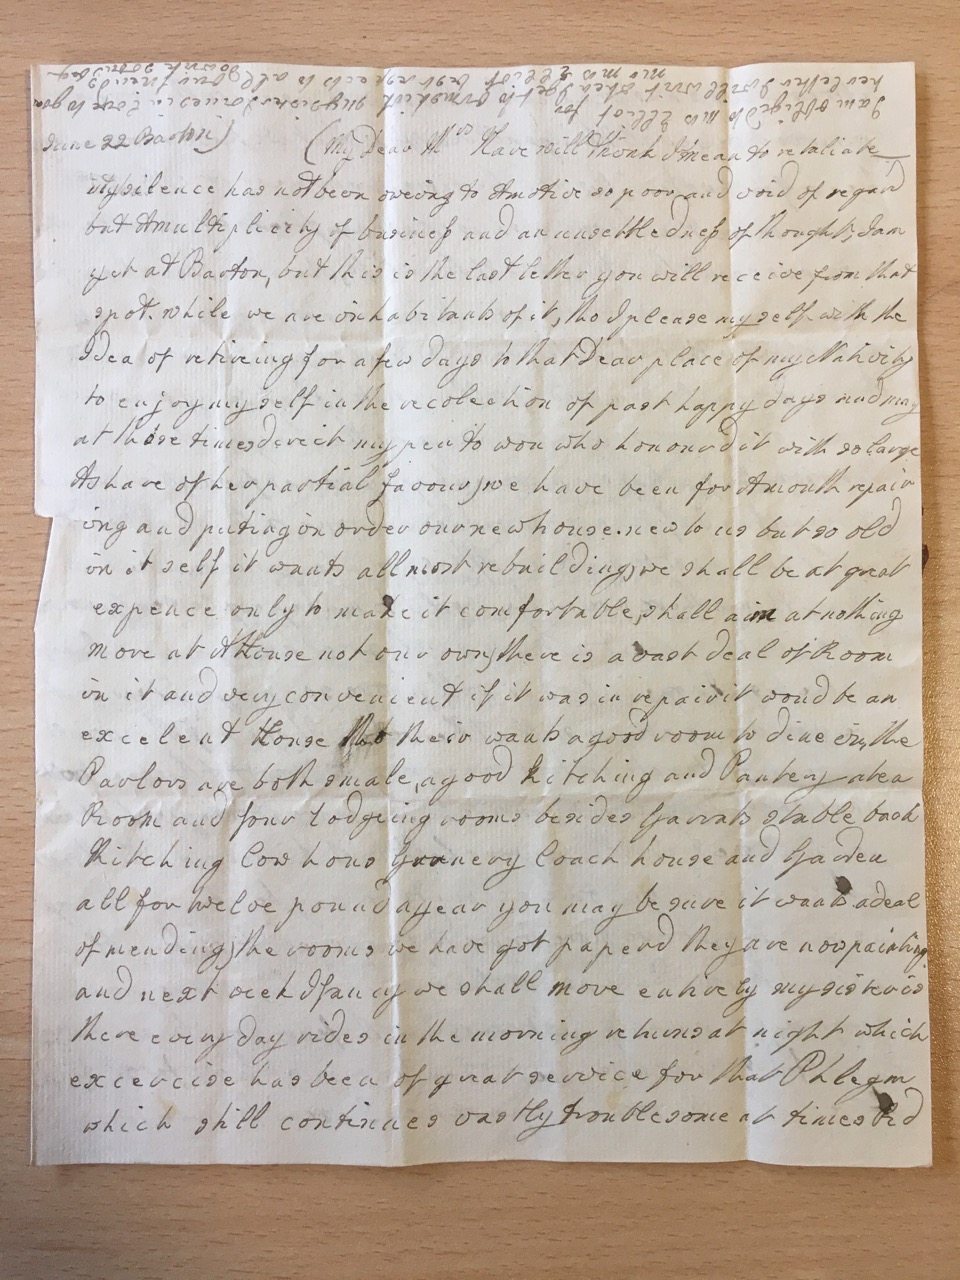 Image #1 of letter: Mary Ann Hesketh to Ann Hare, 22 June